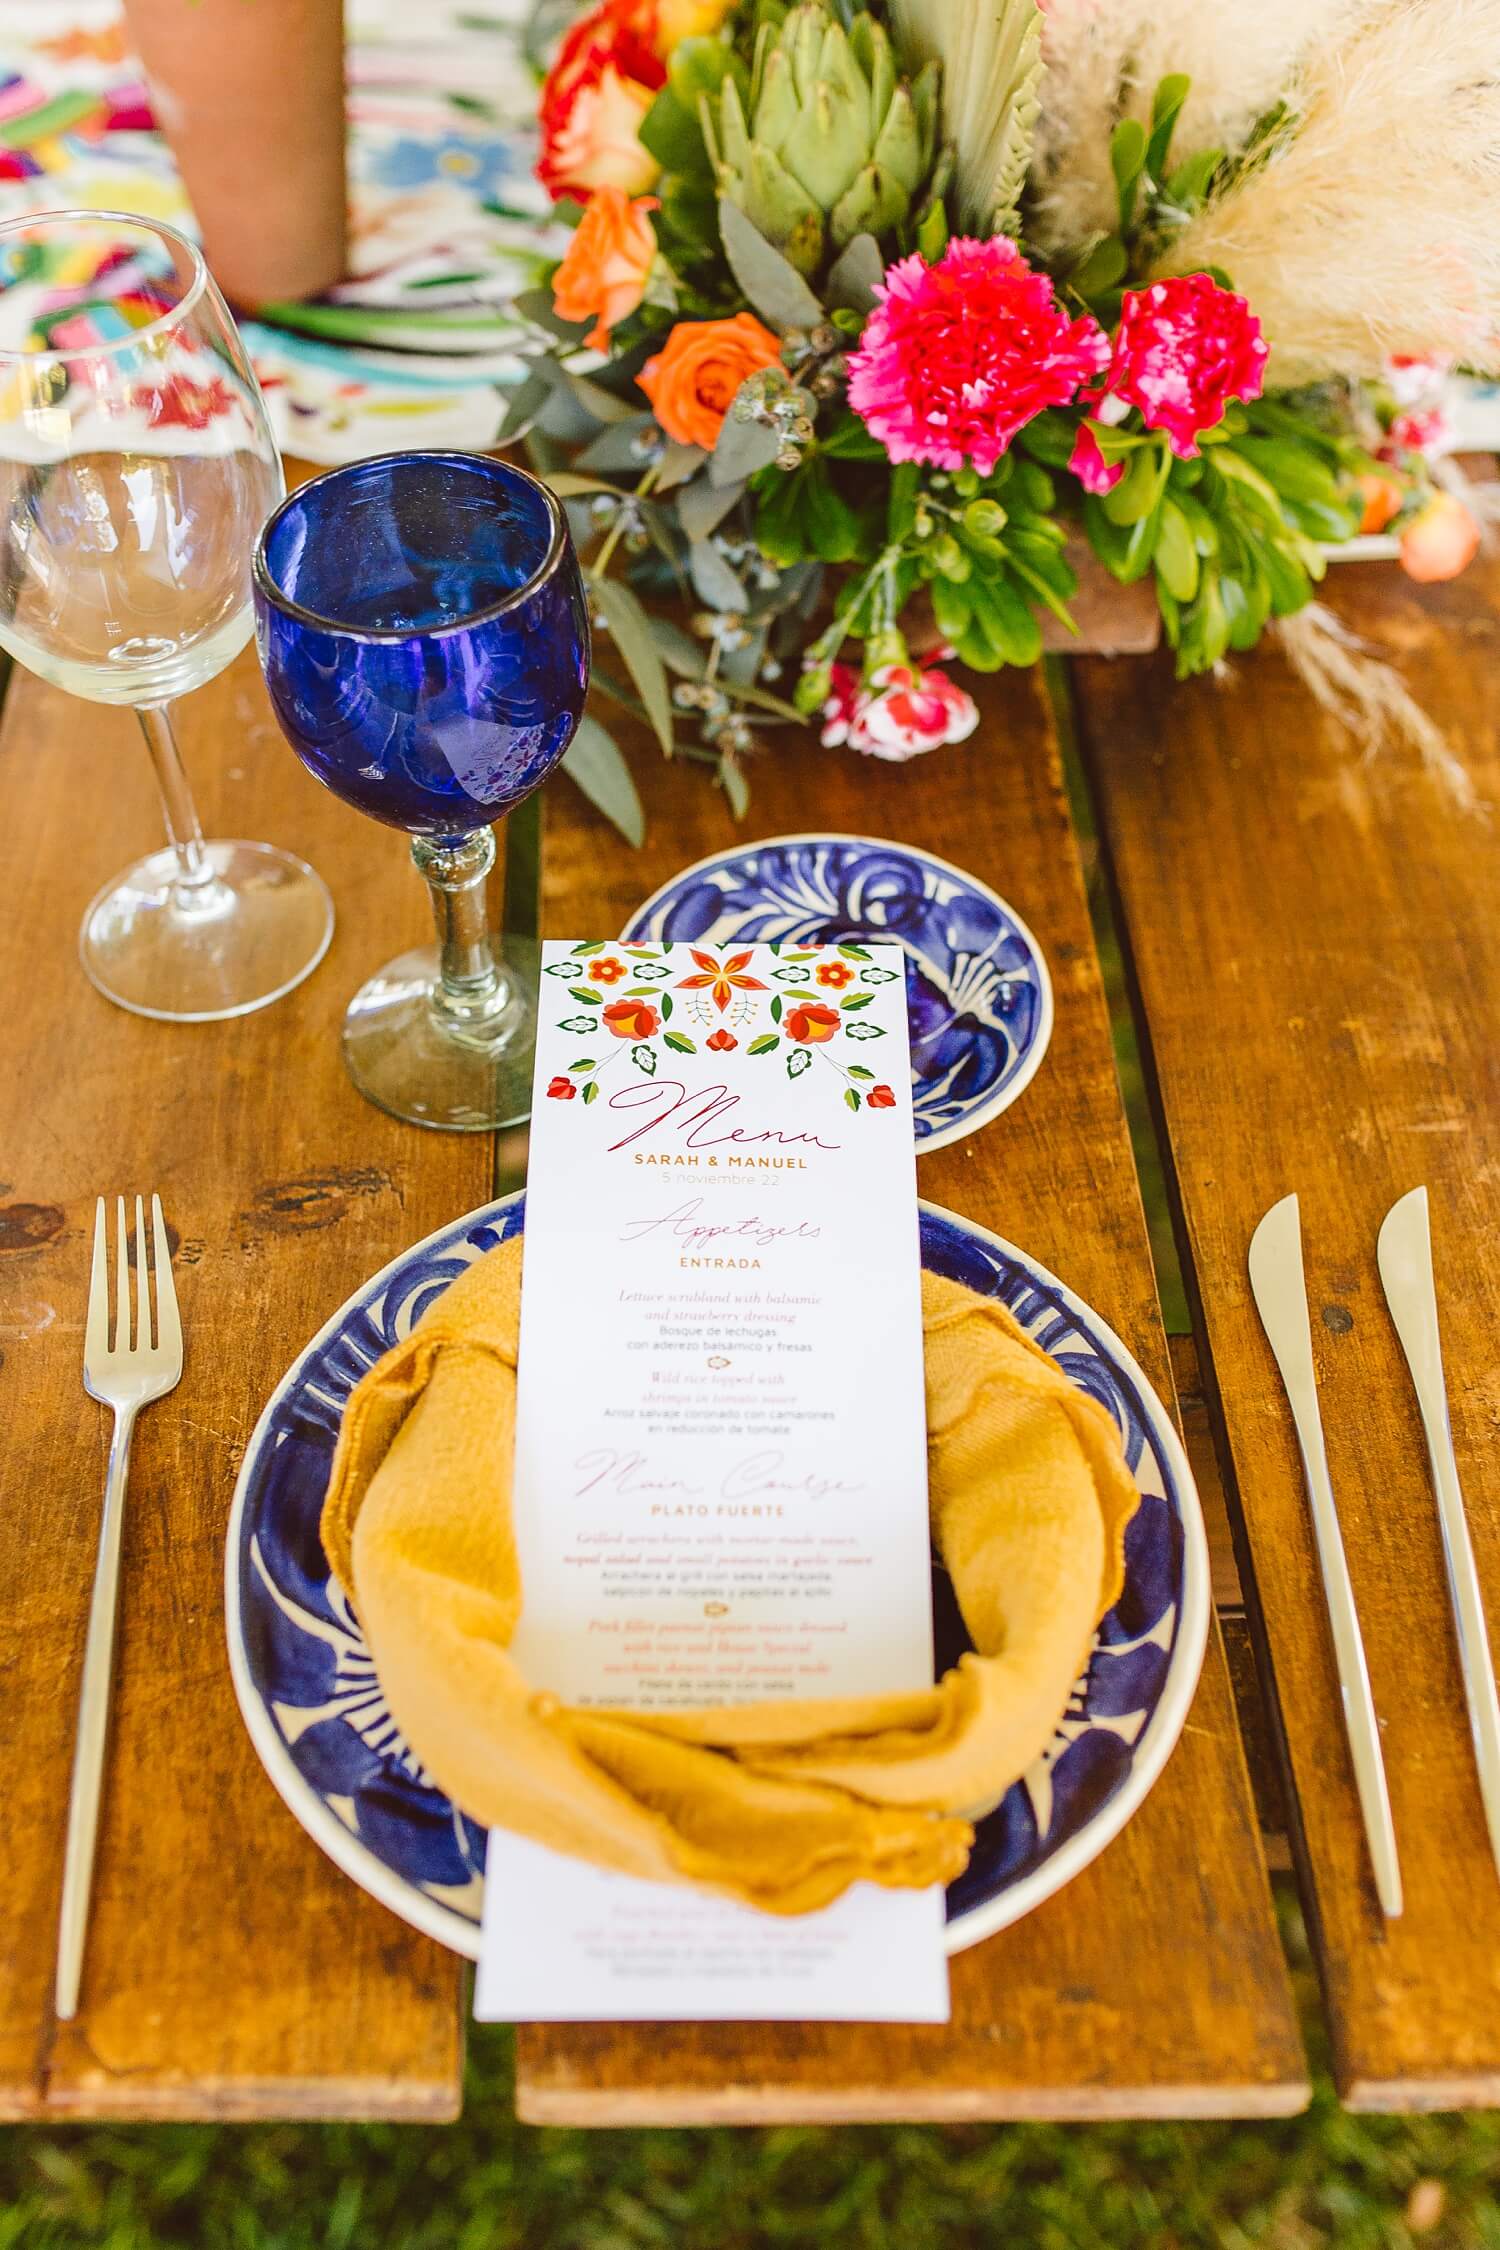 Blue and white talavera plates with yellow napkin and colorful menu at wedding reception | Brooke Michelle Photo